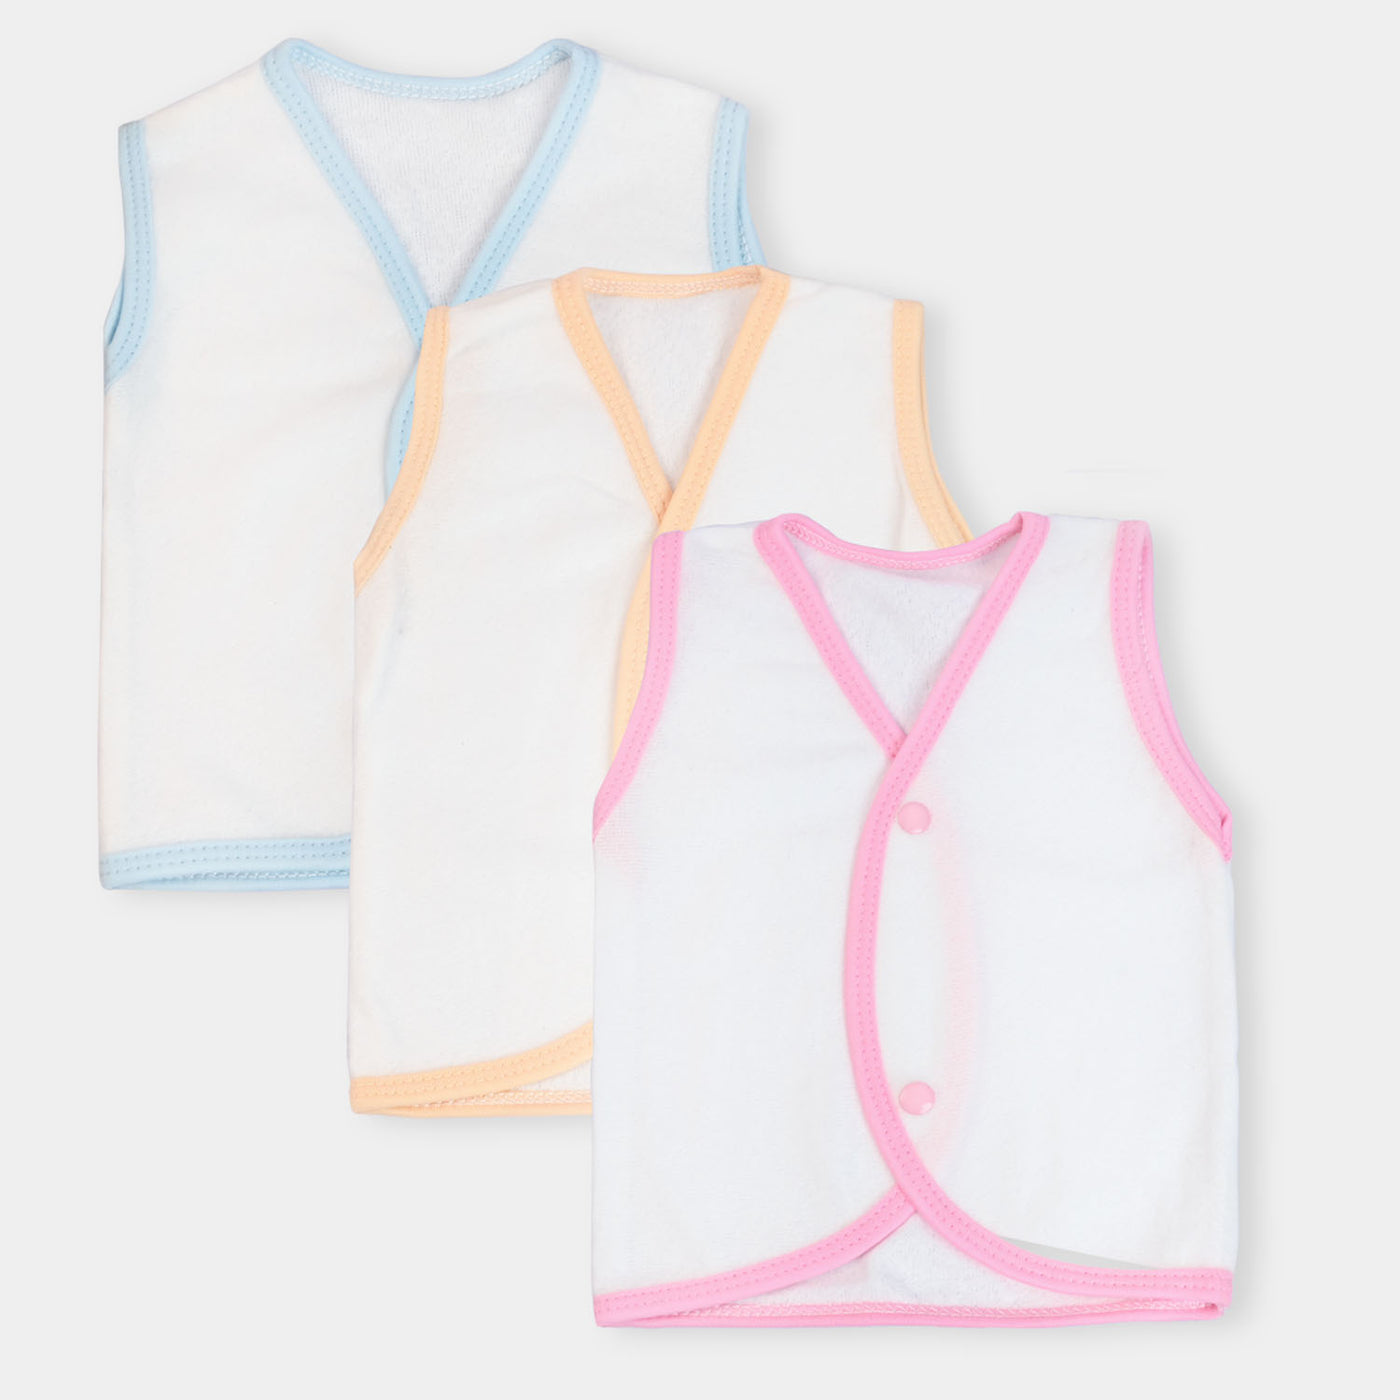 Baby Warm Vest Sando Small Size Pack of 3